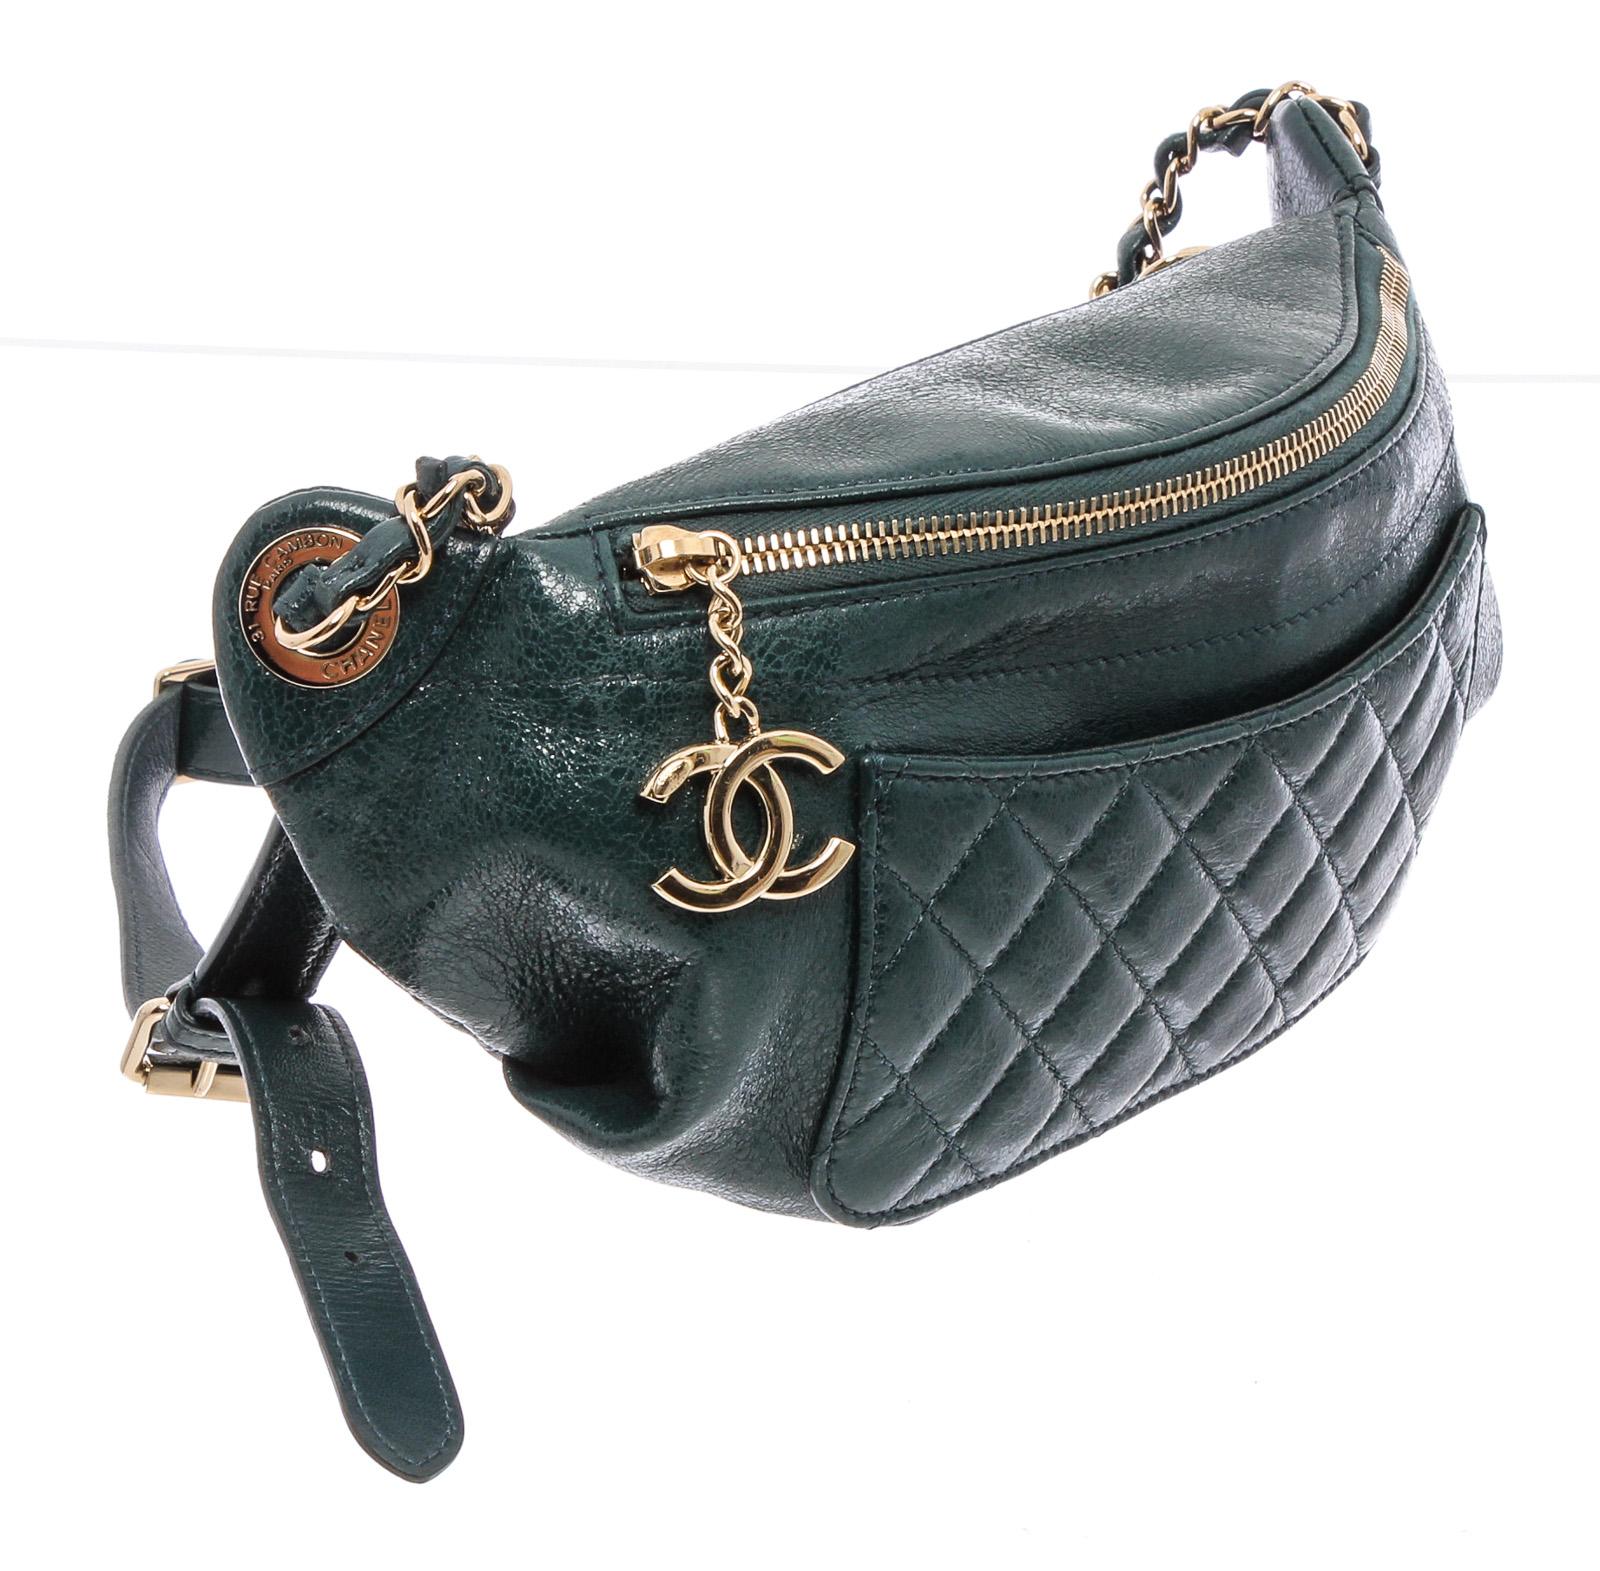 Green lambskin Chanel Bi Classic waist bag with gold-tone hardware, single adjustable flat waist strap with chain-link accents, tonal quilted lambskin trim, dual exterior pockets; one with zip closure, tonal grosgrain lining, single interior slit